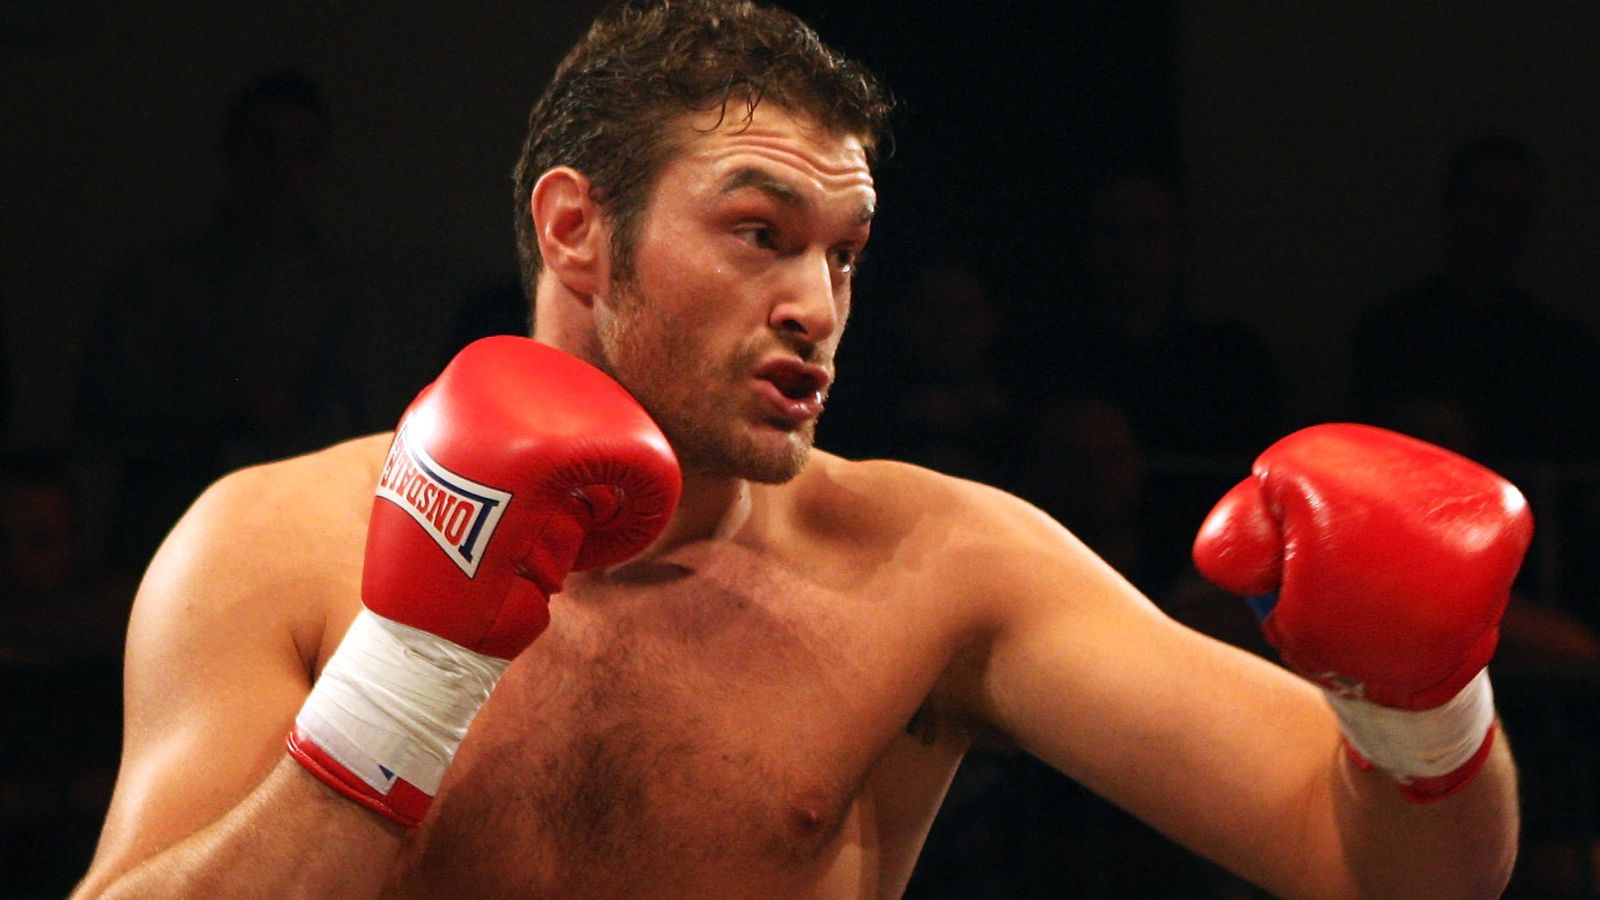 Tyson Fury was first knocked down by Neven Pajkic – this is the untold